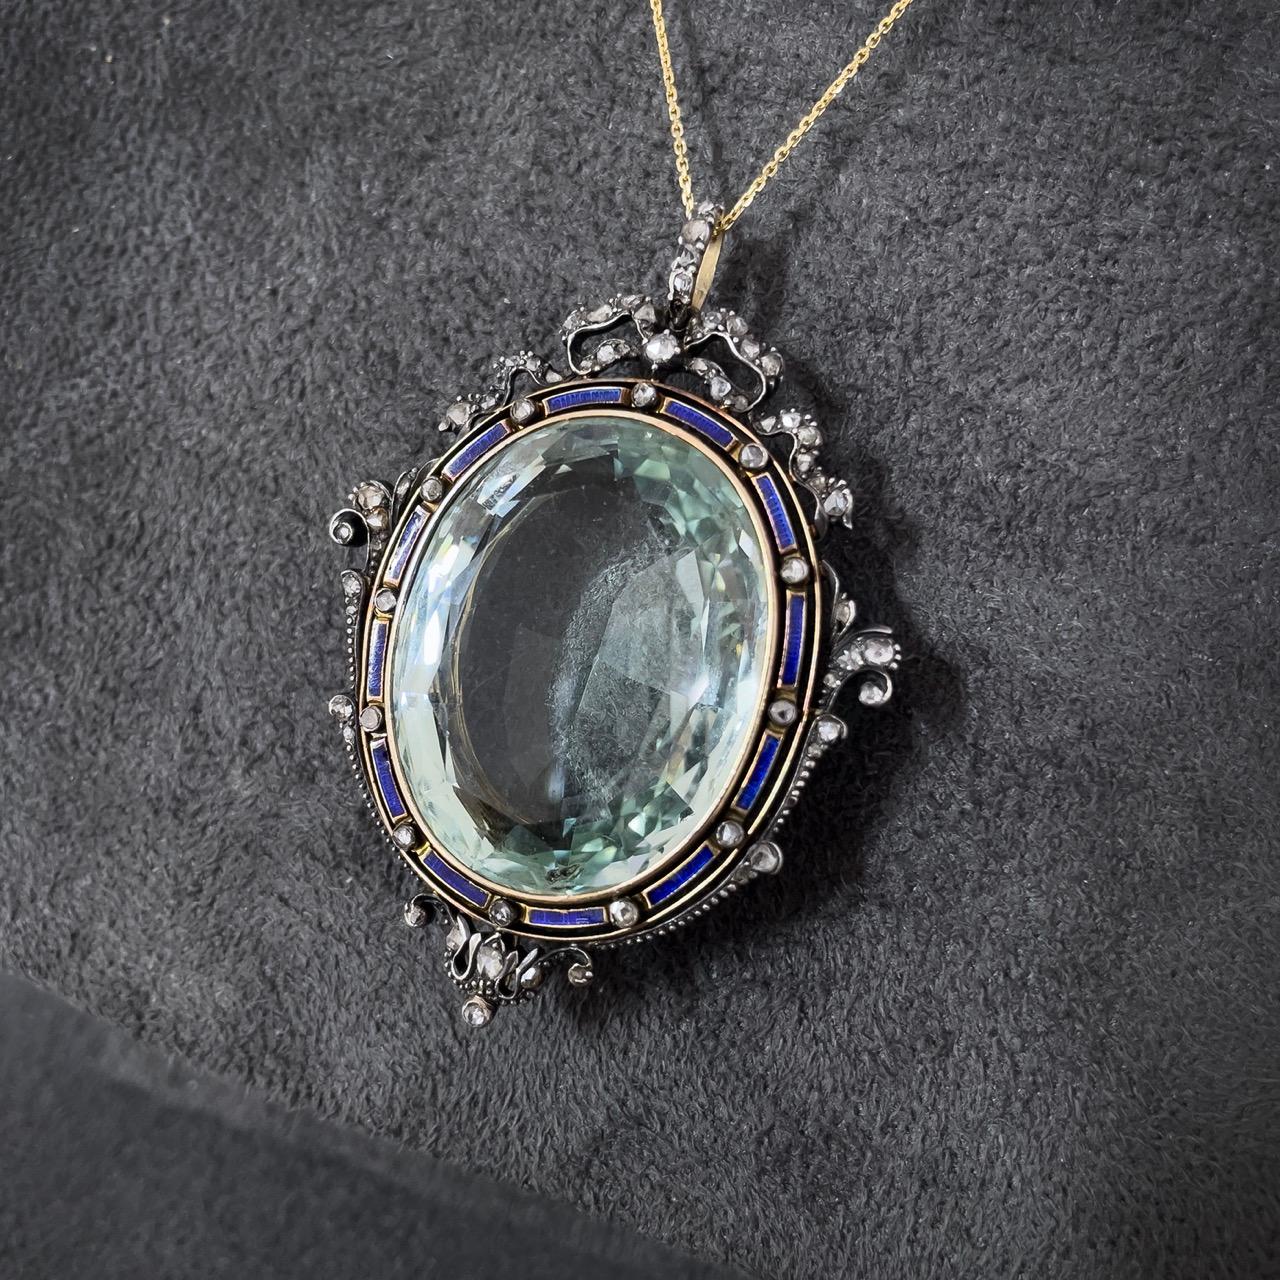 Early Victorian Victorian Large Aquamarine Diamond and Enamel Pendant, ca. 1860s For Sale